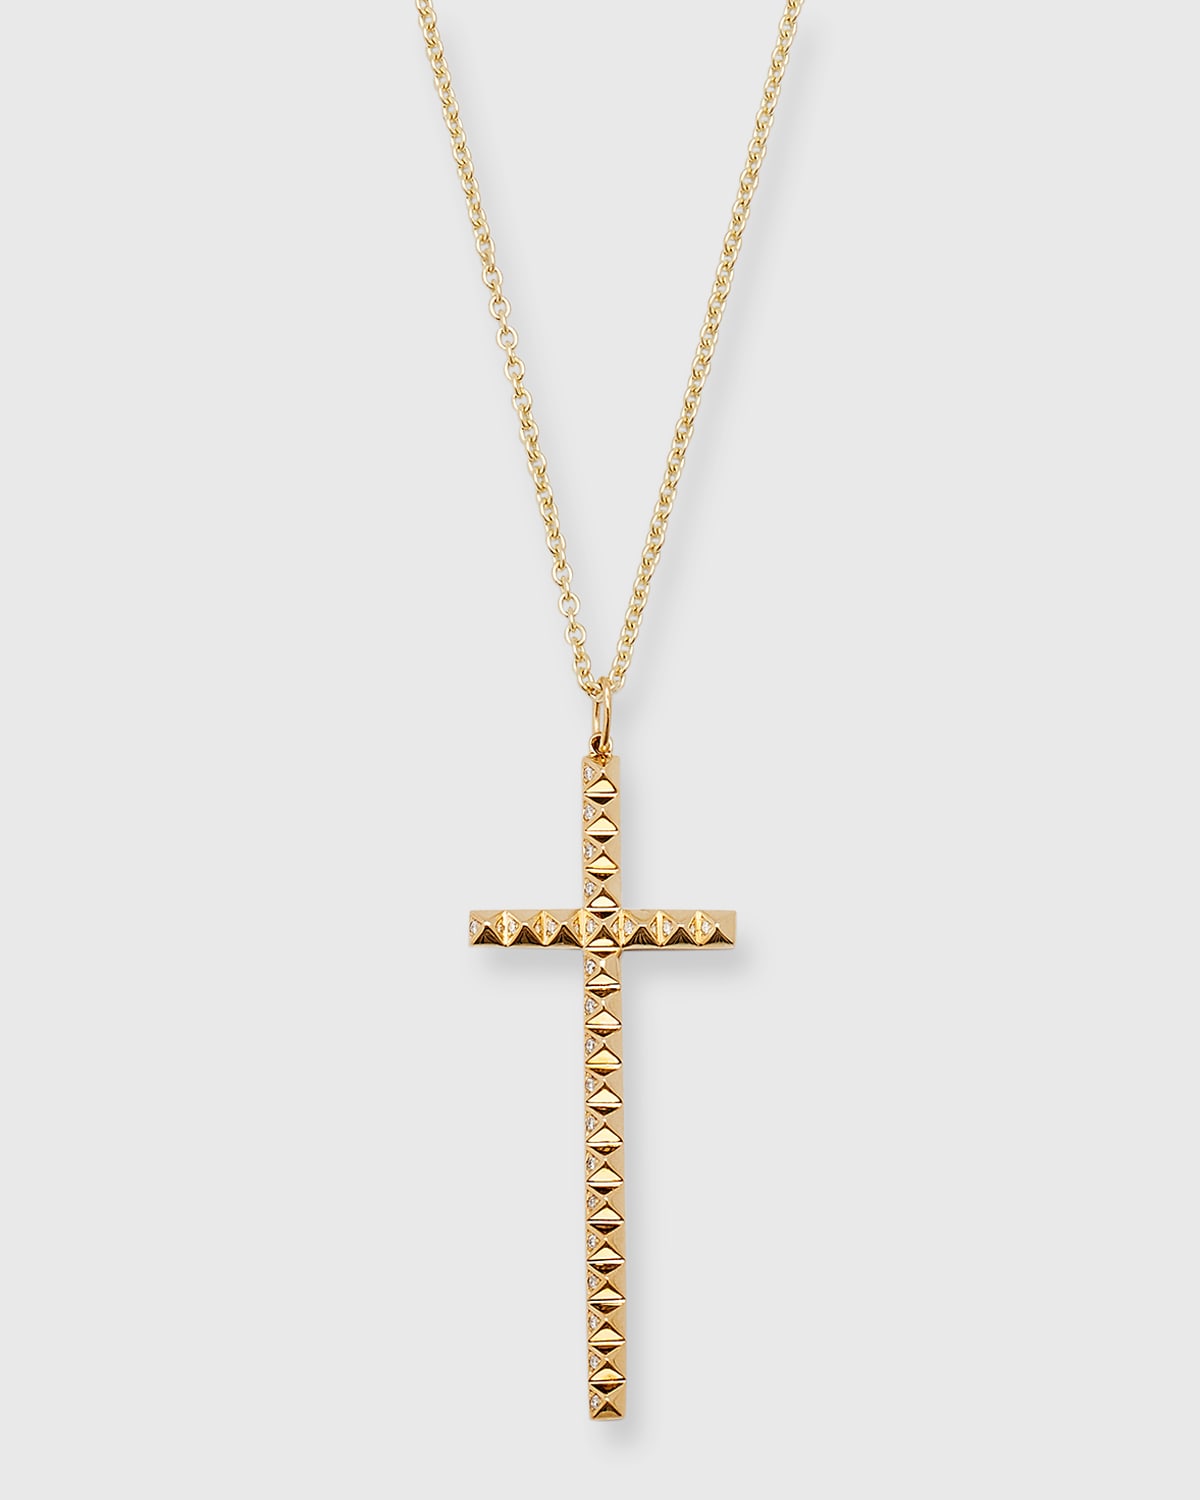 Sydney Evan Men's Pyramid Spiked Diamond Cross Charm Necklace In Gold